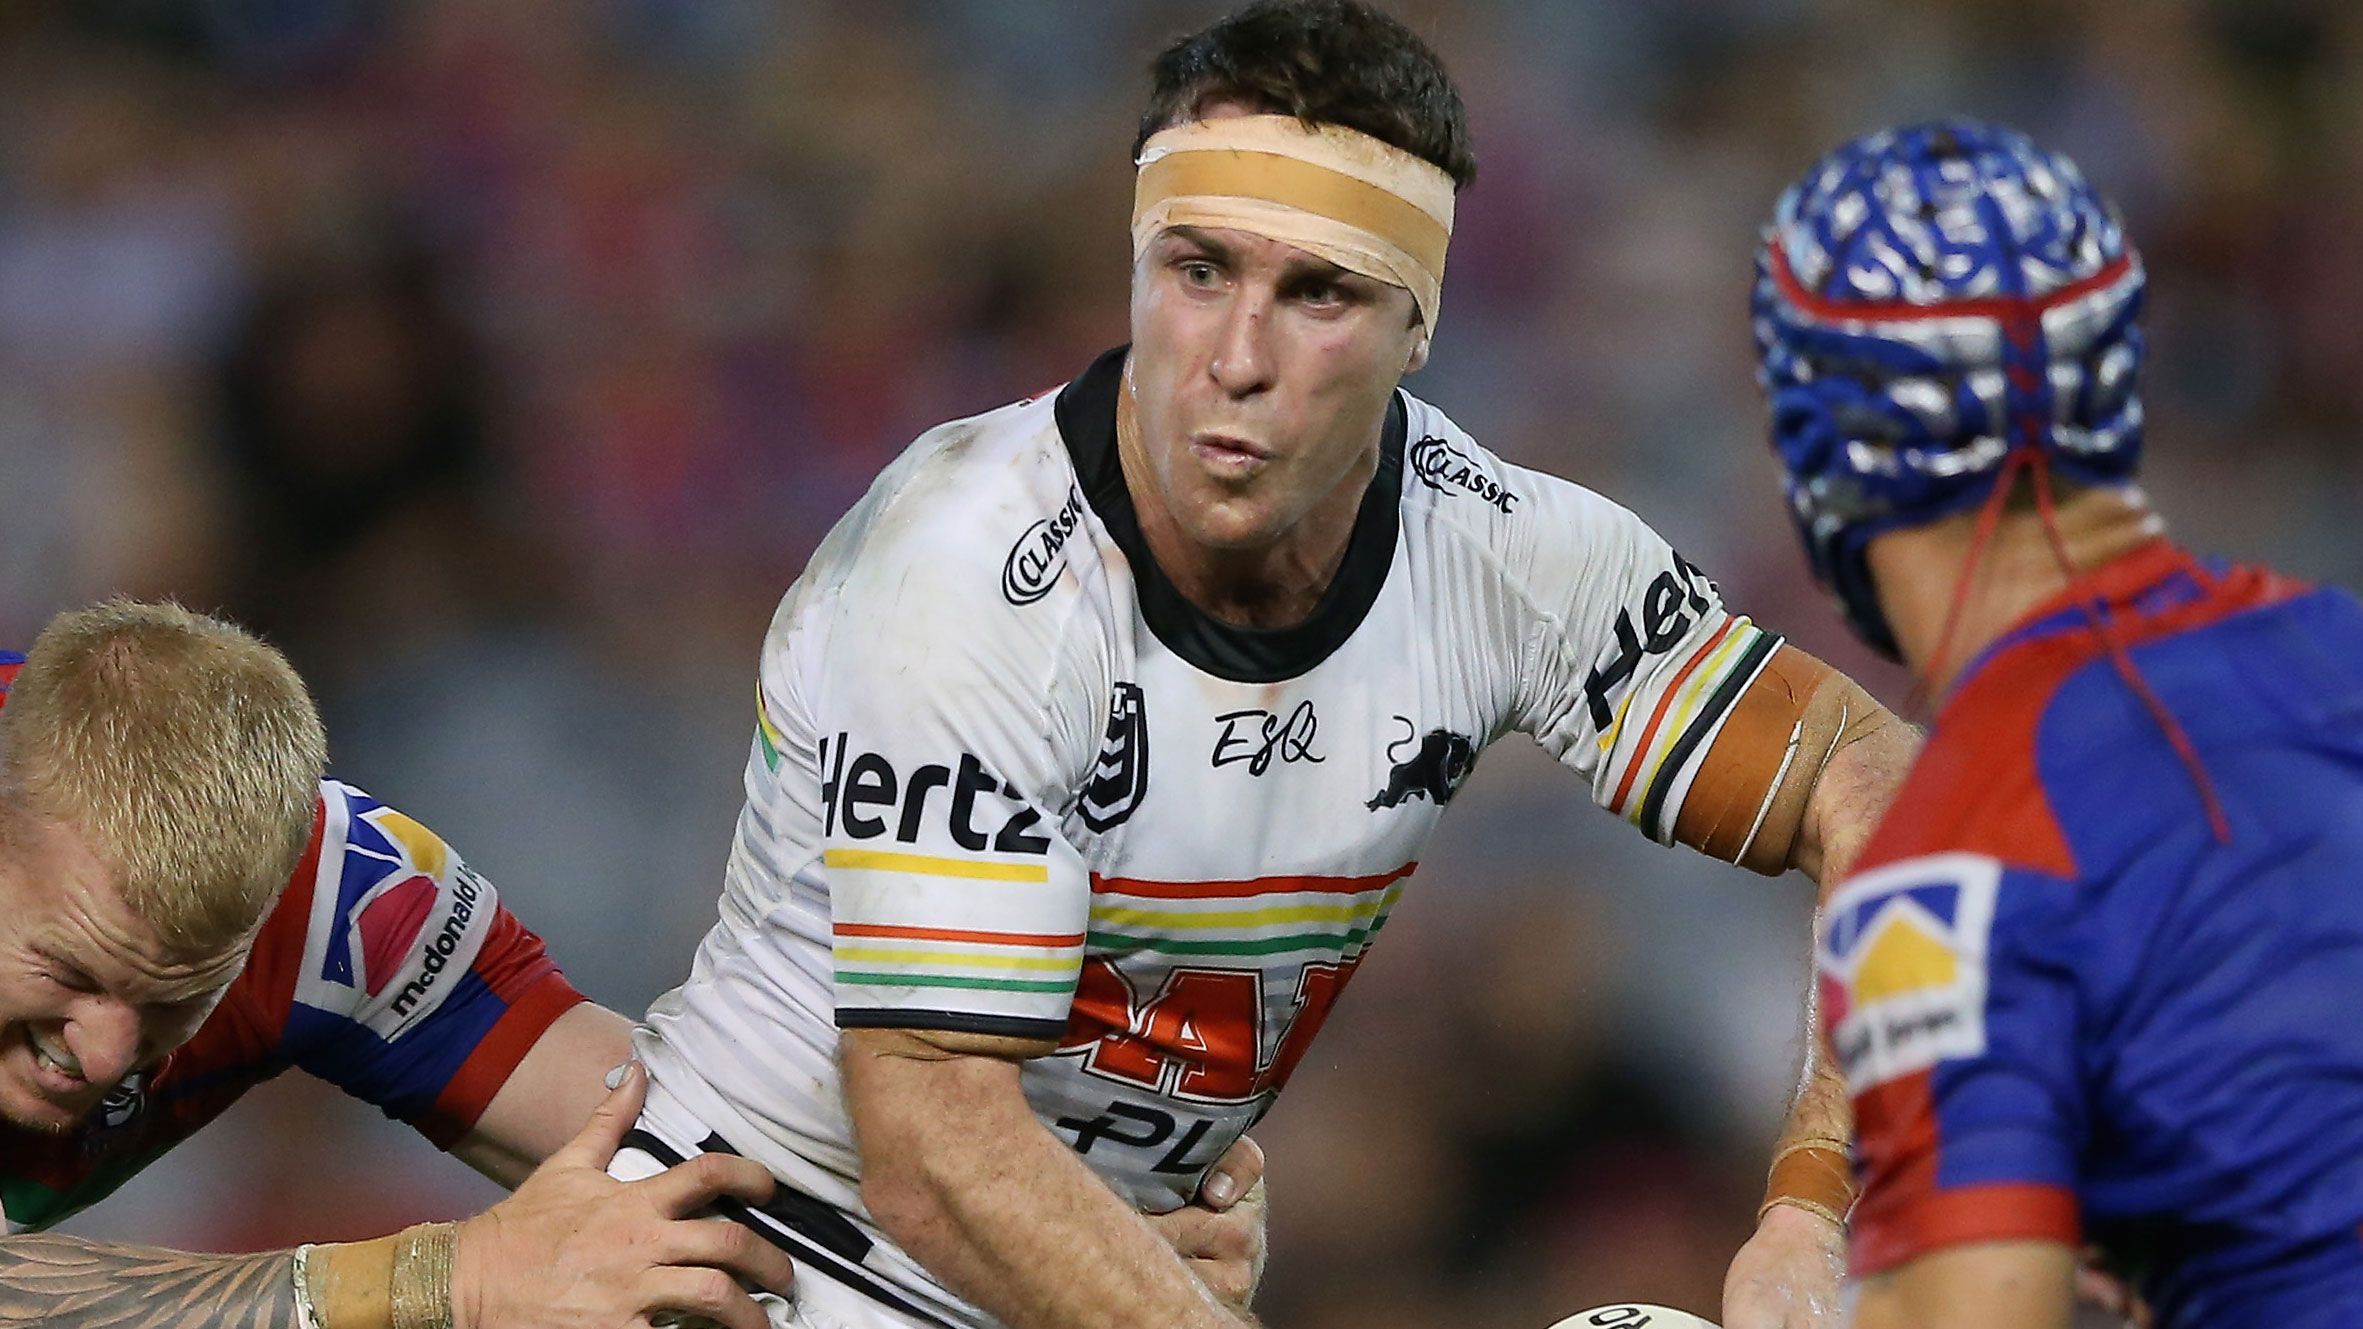 NRL veteran James Maloney to leave Panthers for English Super League